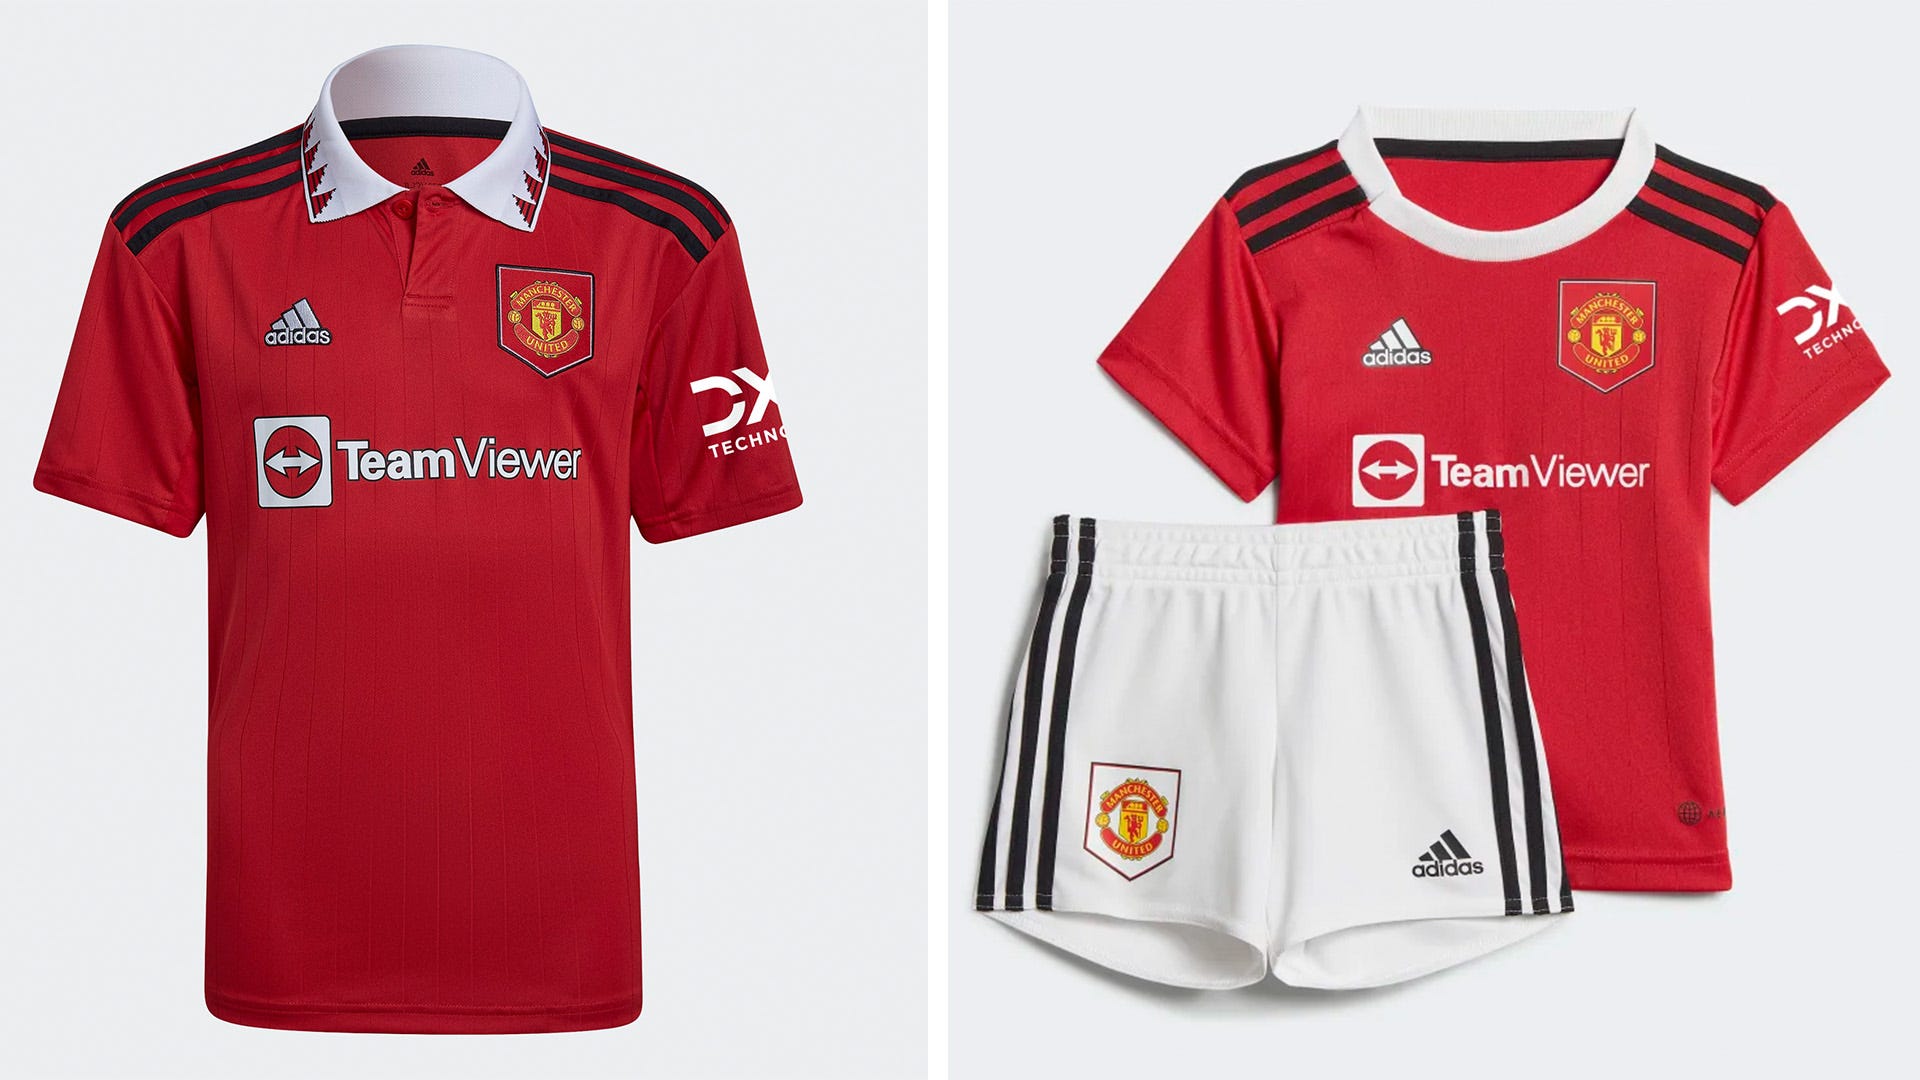 Manchester United retro kit is on sale - but UK buyers will have